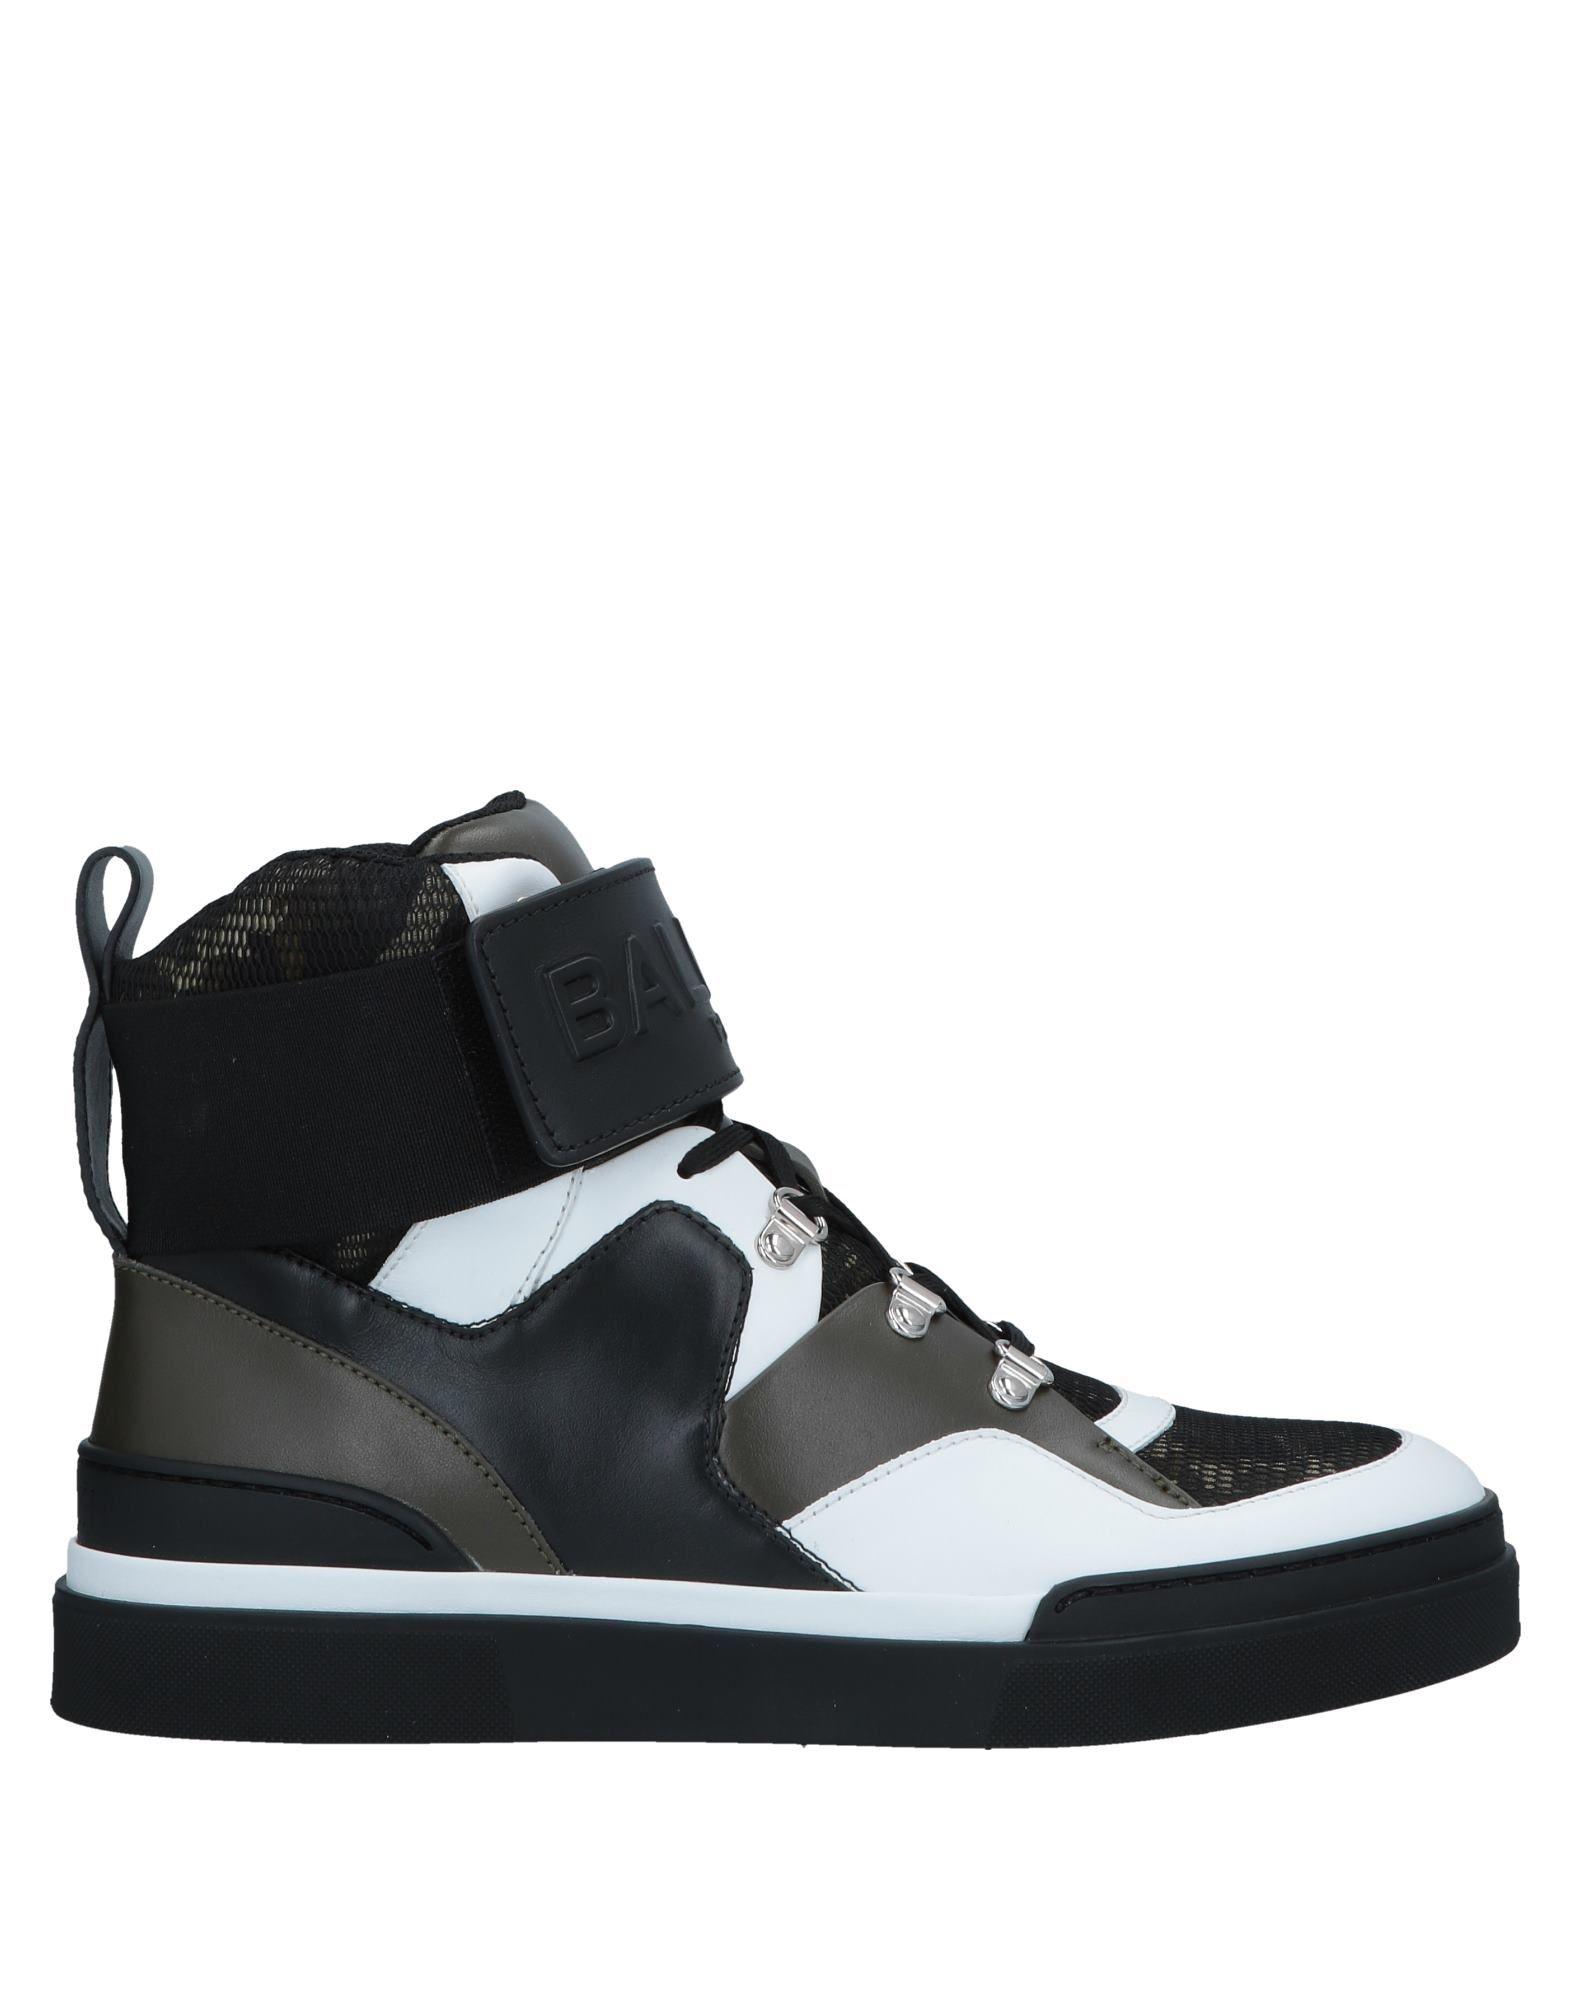 Balmain Leather High-tops & Sneakers in White for Men - Lyst